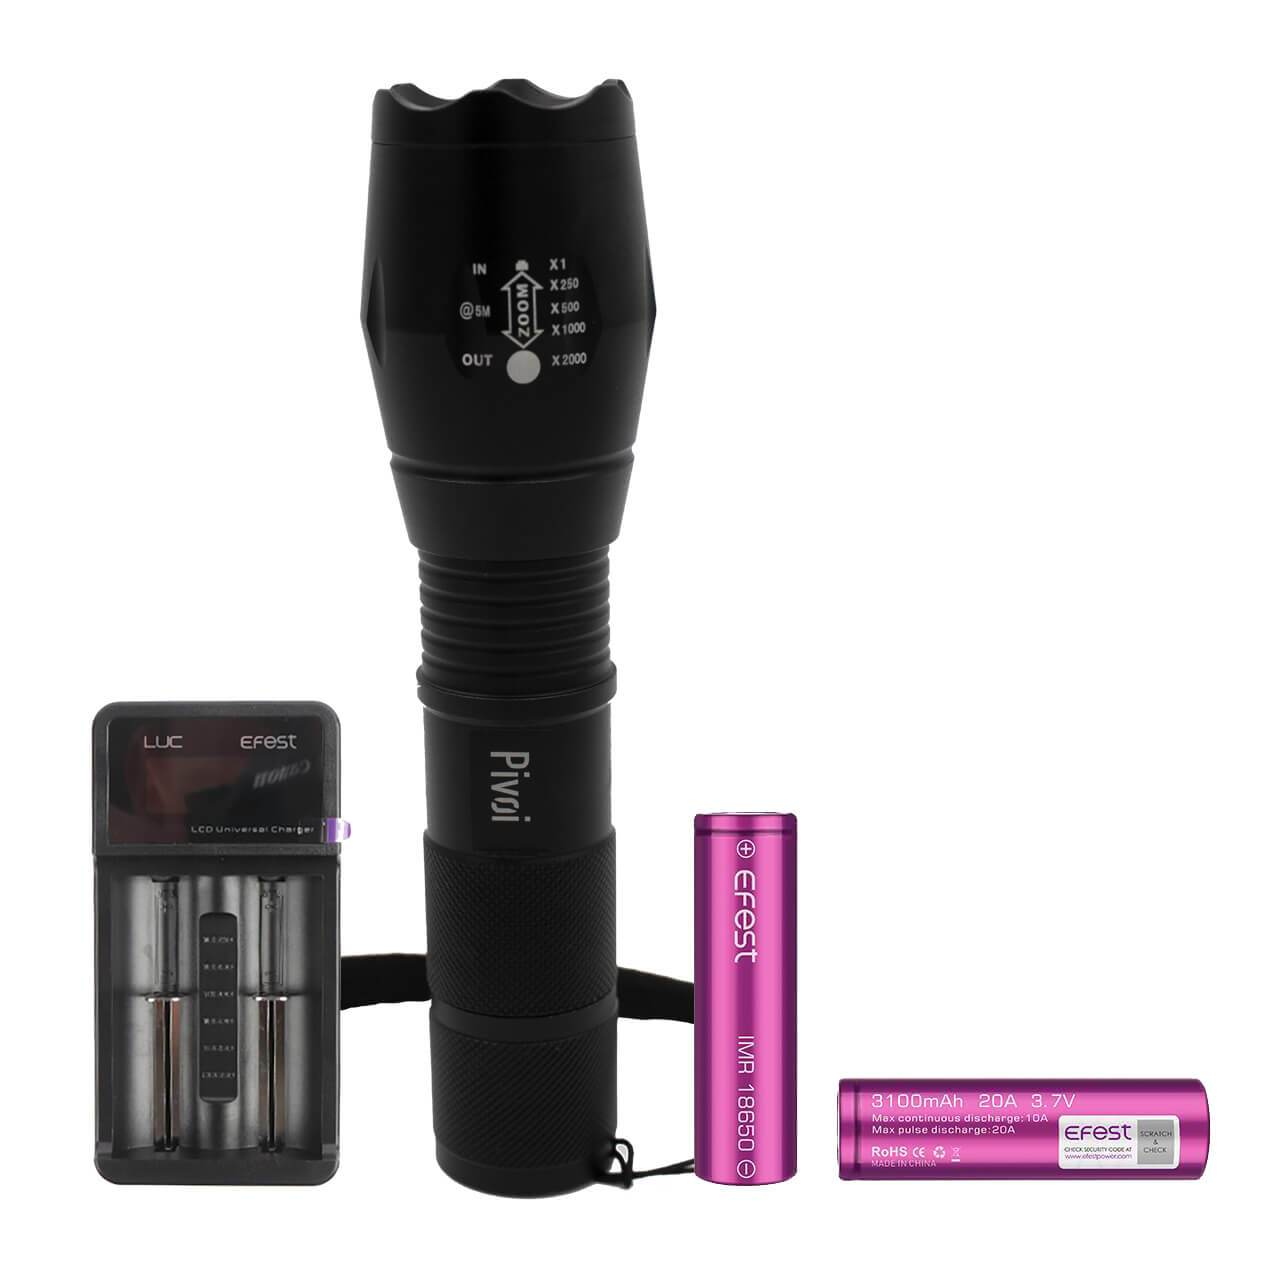 10W Rechargeable Water Resistant Flashlight with Efest LUC V2 Charger and 2 x 18650 Battery